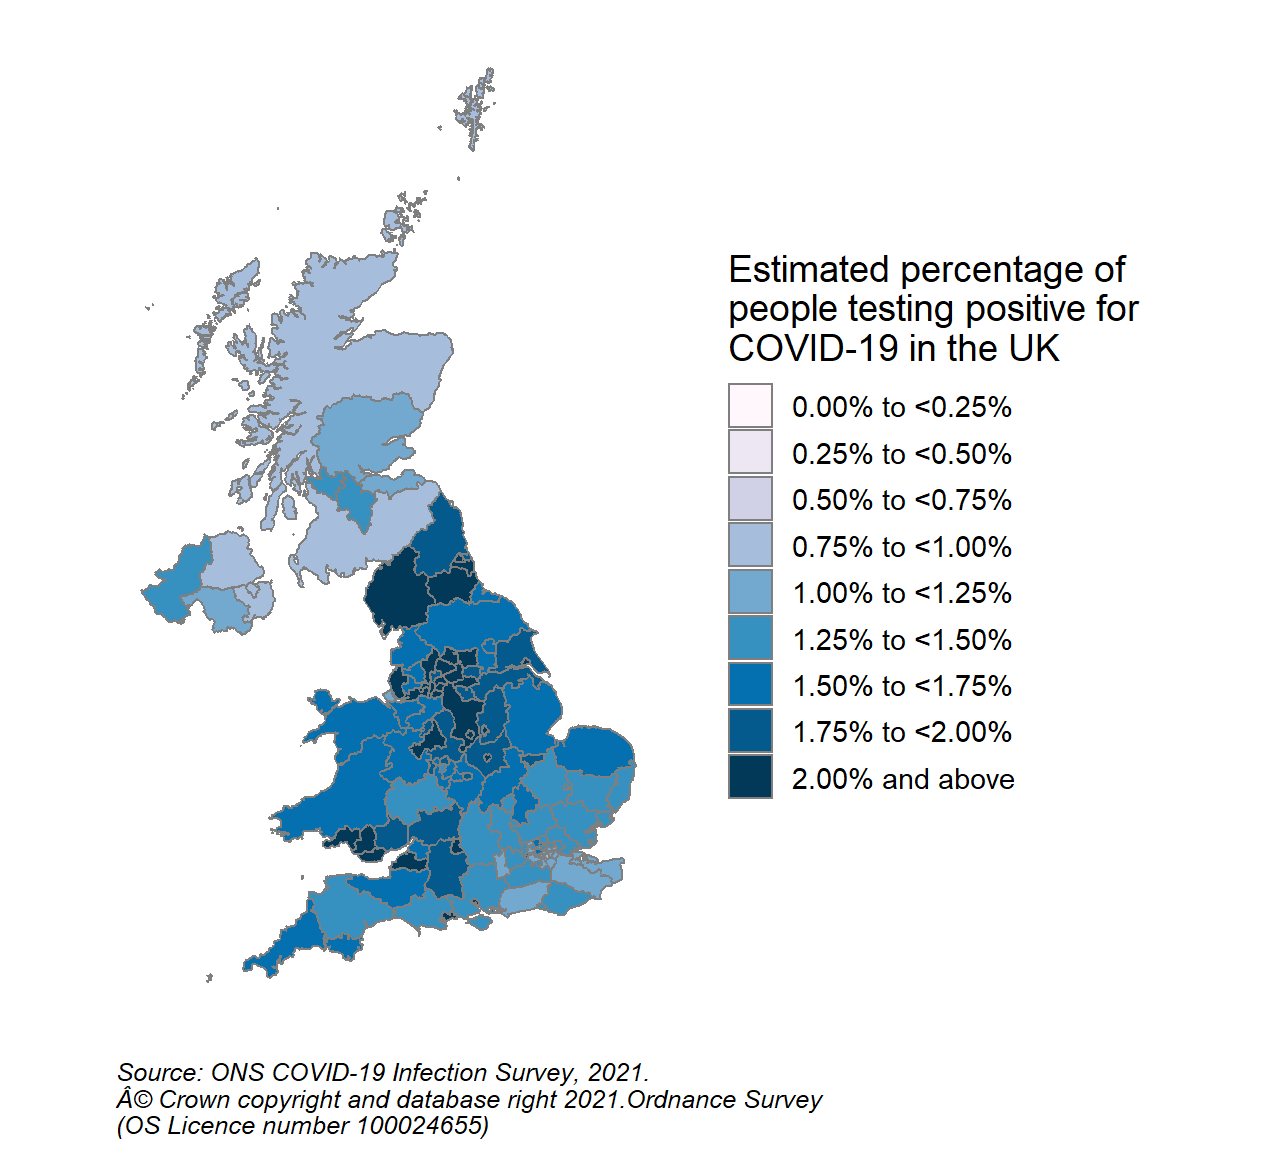 This colour coded map of the UK shows the modelled estimates of the percentage of the private residential population testing positive for COVID-19, by COVID-19 Infection Survey sub-regions. In Scotland, these sub-regions are comprised of Health Boards. The regions are: 123 - NHS Grampian, NHS Highland, NHS Orkney, NHS Shetland and NHS Western Isles, 124 - NHS Fife, NHS Forth Valley and NHS Tayside, 125 - NHS Greater Glasgow & Clyde, 126 - NHS Lothian, 127 - NHS Lanarkshire, 128 - NHS Ayrshire & Arran, NHS Borders and NHS Dumfries & Galloway.  The sub-regions with the highest modelled estimate for the percentage of people testing positive were CIS Region 125 (NHS Greater Glasgow and Clyde) at 1.48% (95% credible interval: 1.14% to 1.88%) and CIS region 127 (NHS Lanarkshire) at 1.46% (95% credible interval: 1.10% to 1.91%).  The region with the lowest modelled estimate was Region 128 (NHS Ayrshire & Arran, NHS Borders and NHS Dumfries & Galloway), at 0.84% (95% credible interval: 0.60% to 1.14%).